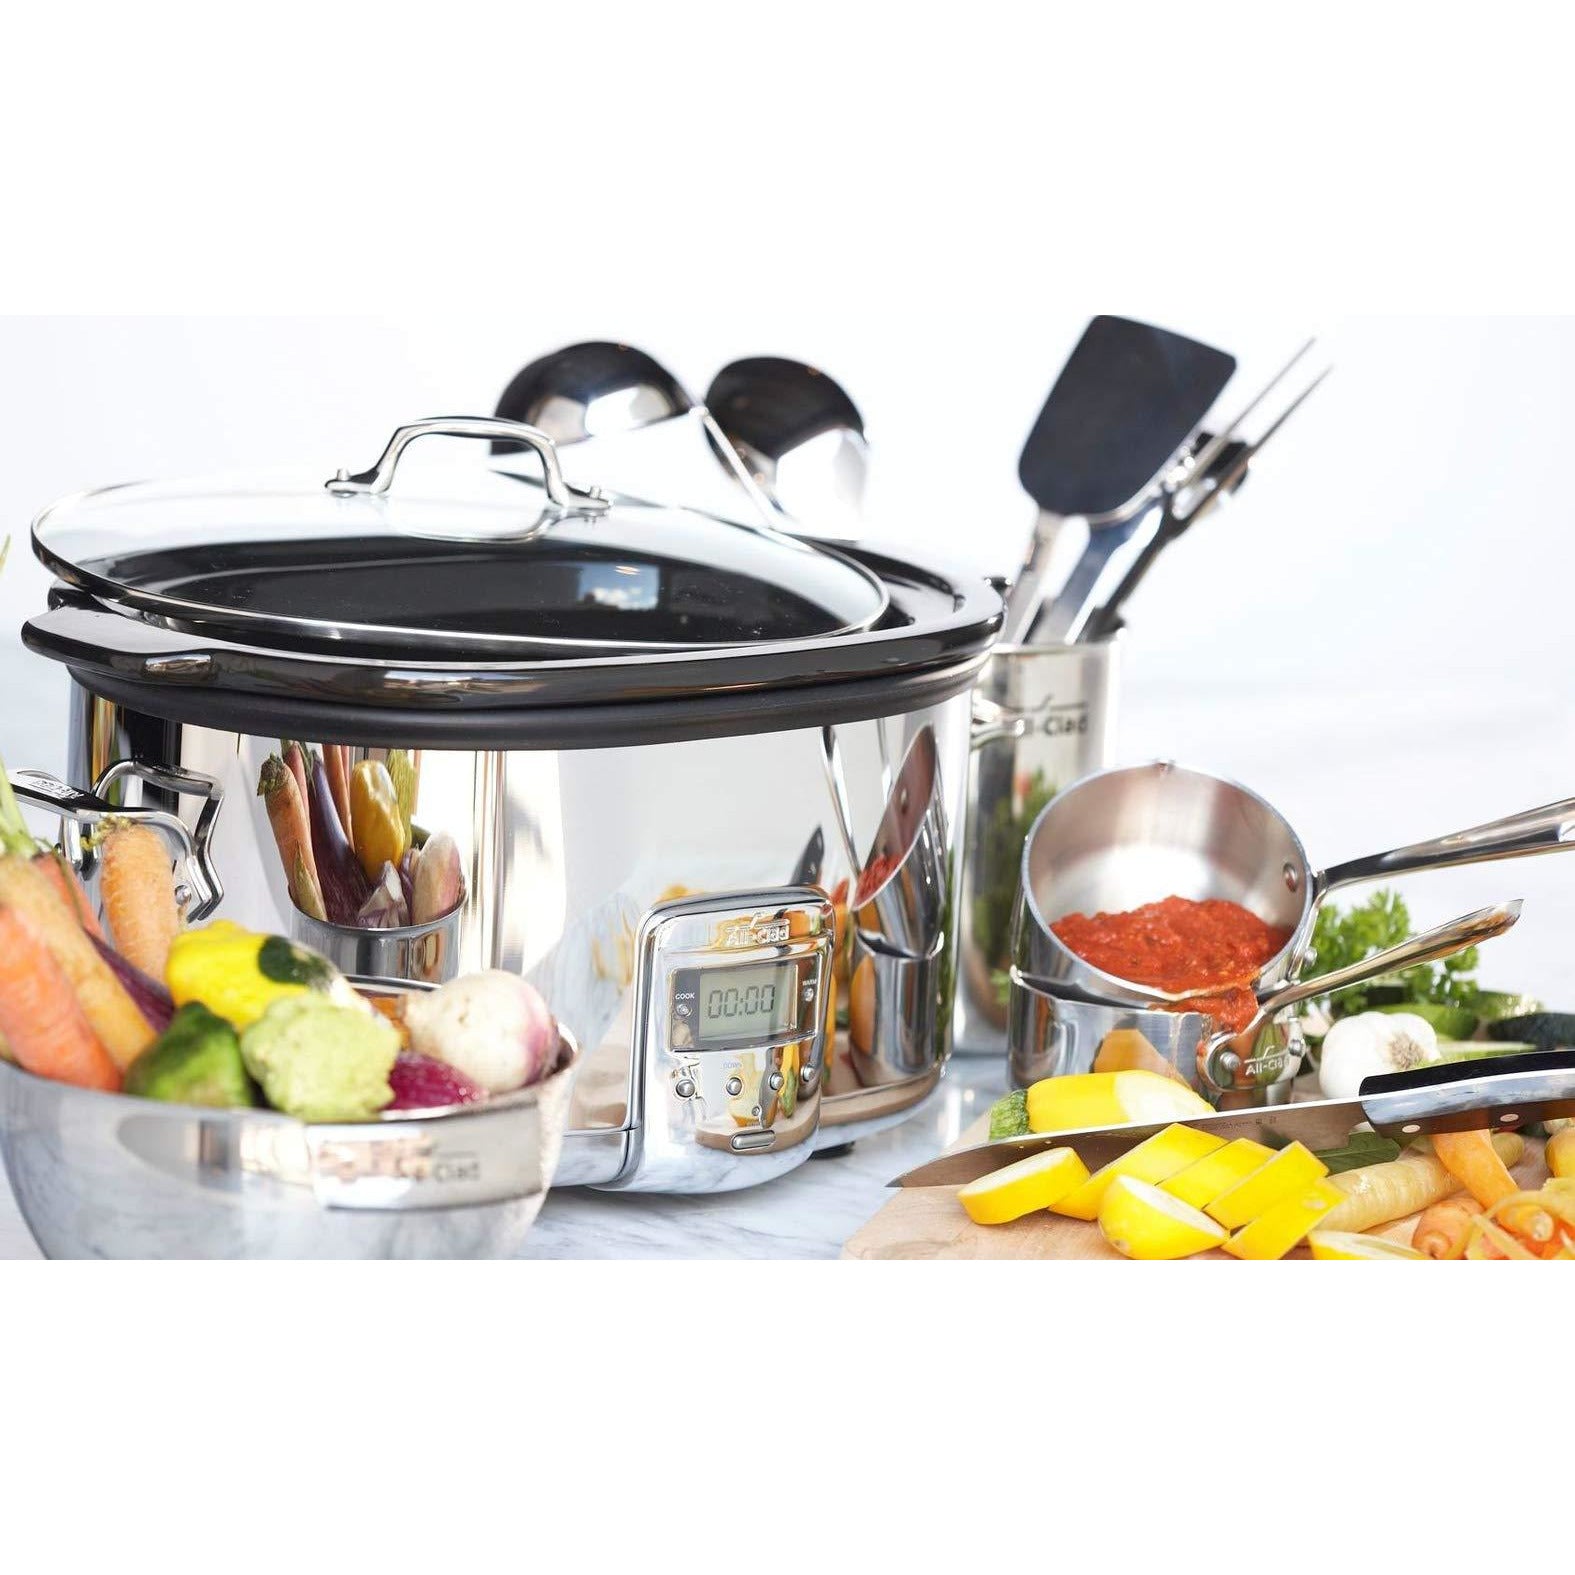 All-Clad Programmable Oval-Shaped Slow Cooker with Black Ceramic